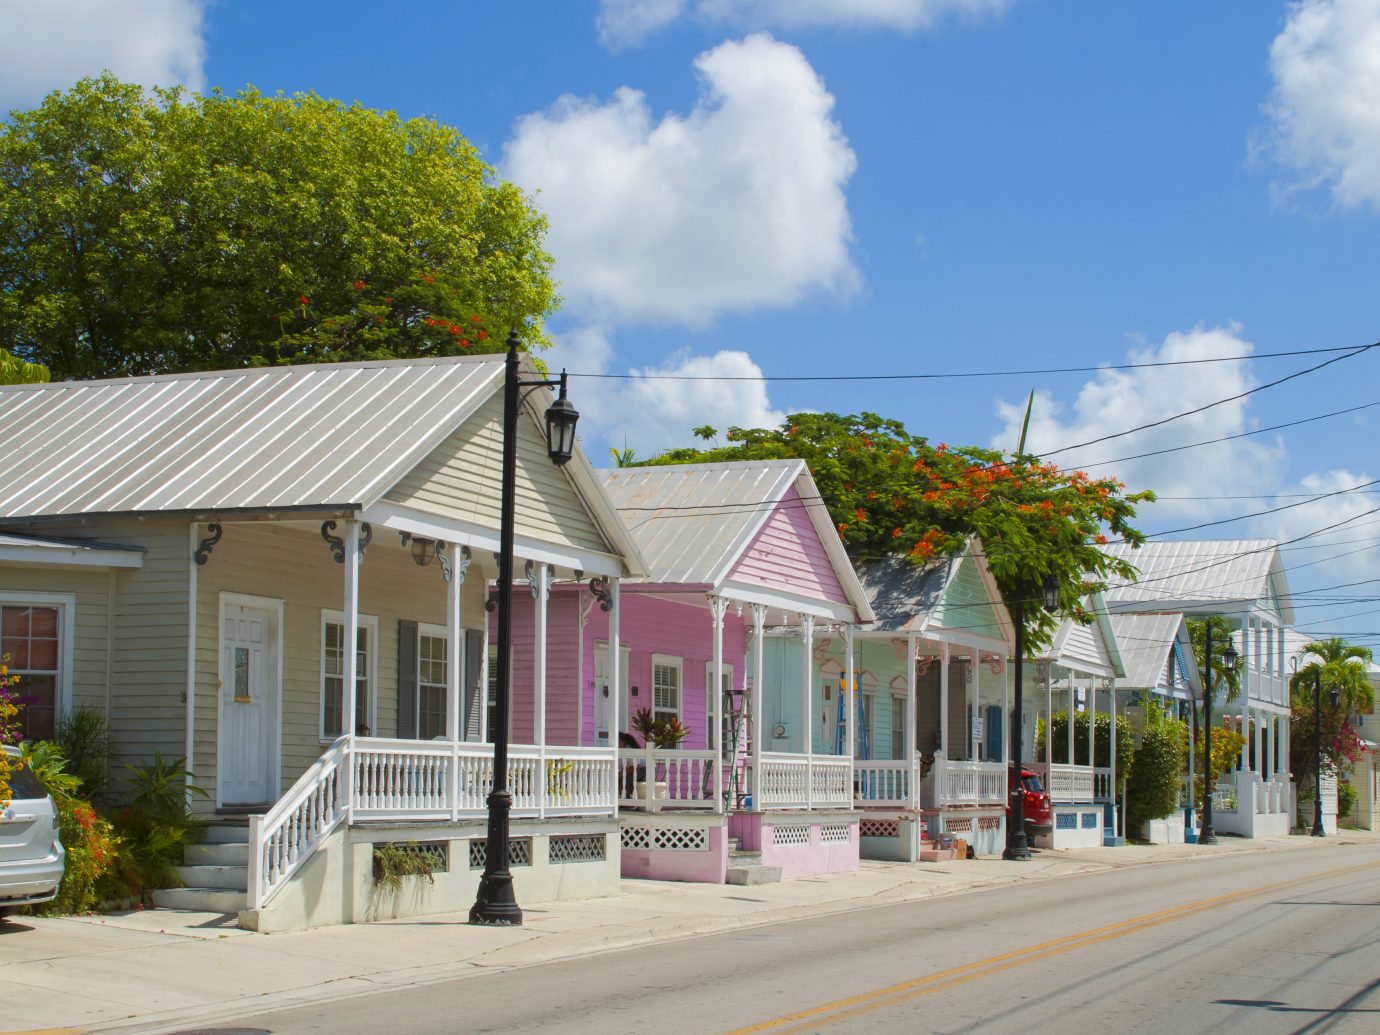 View of the street in the historical district of Key West, USA